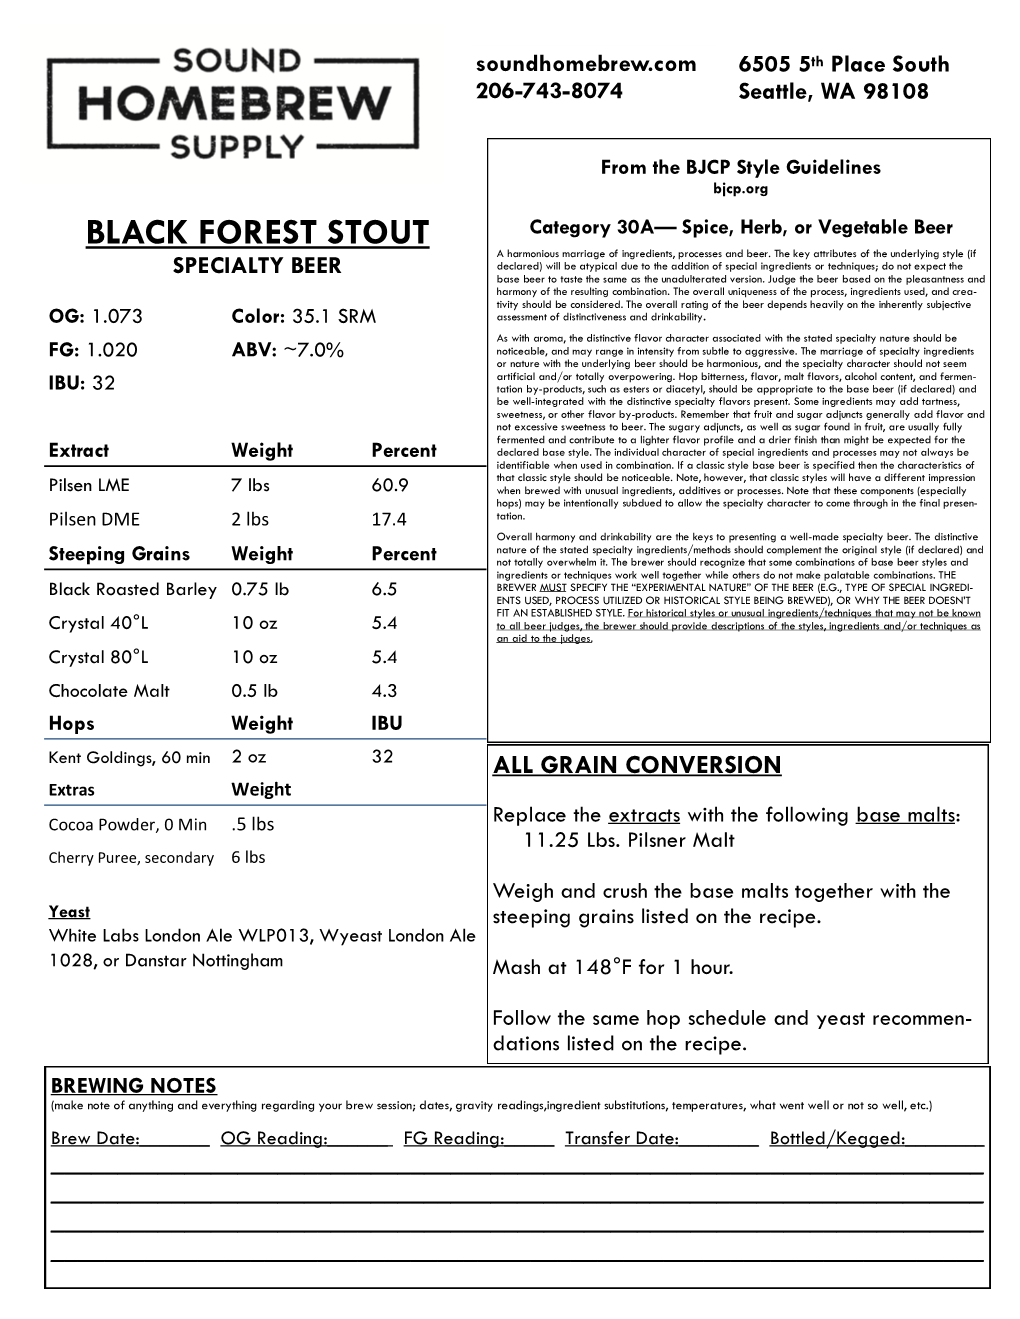 BLACK FOREST STOUT Category 30A— Spice, Herb, Or Vegetable Beer a Harmonious Marriage of Ingredients, Processes and Beer